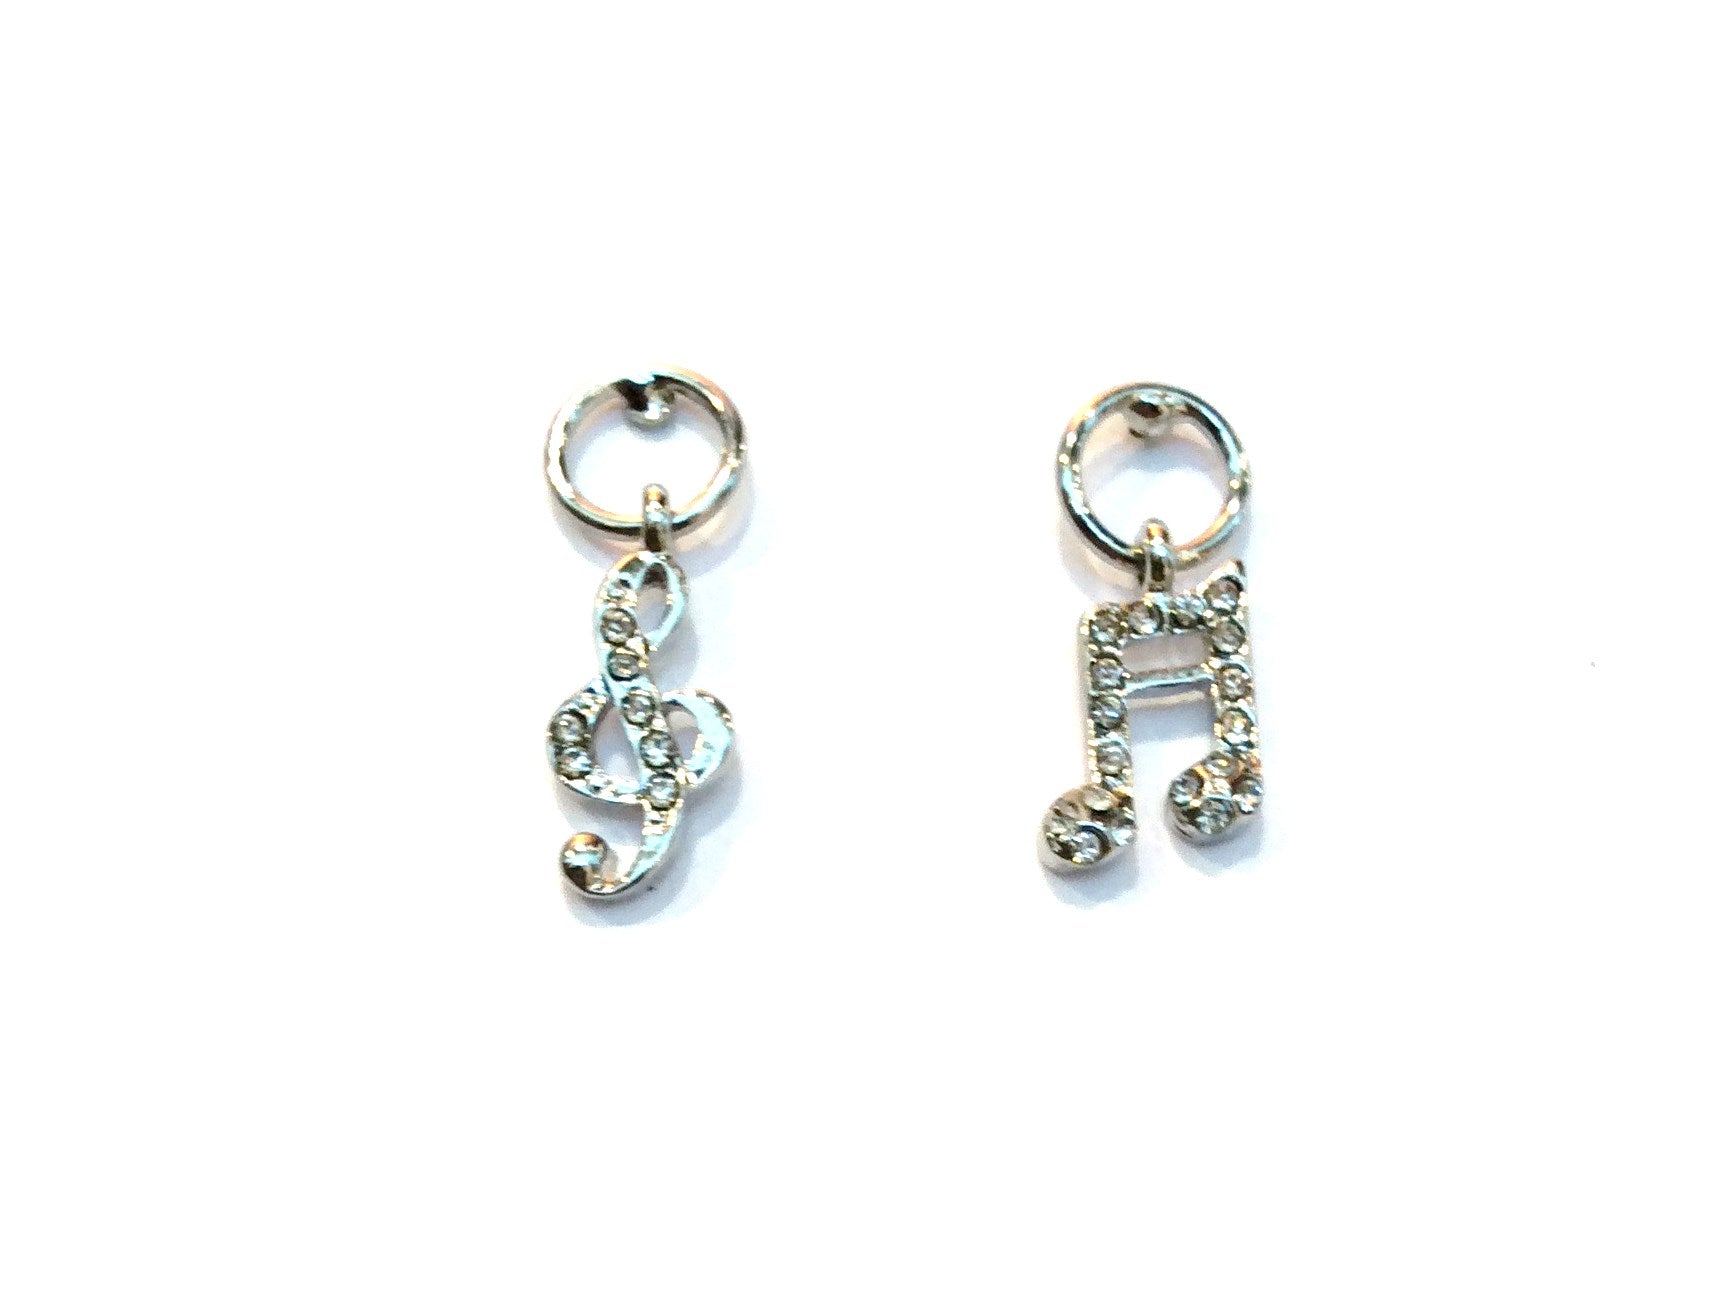 Treble Clef/Music Notes Dangling Earrings #27-2101